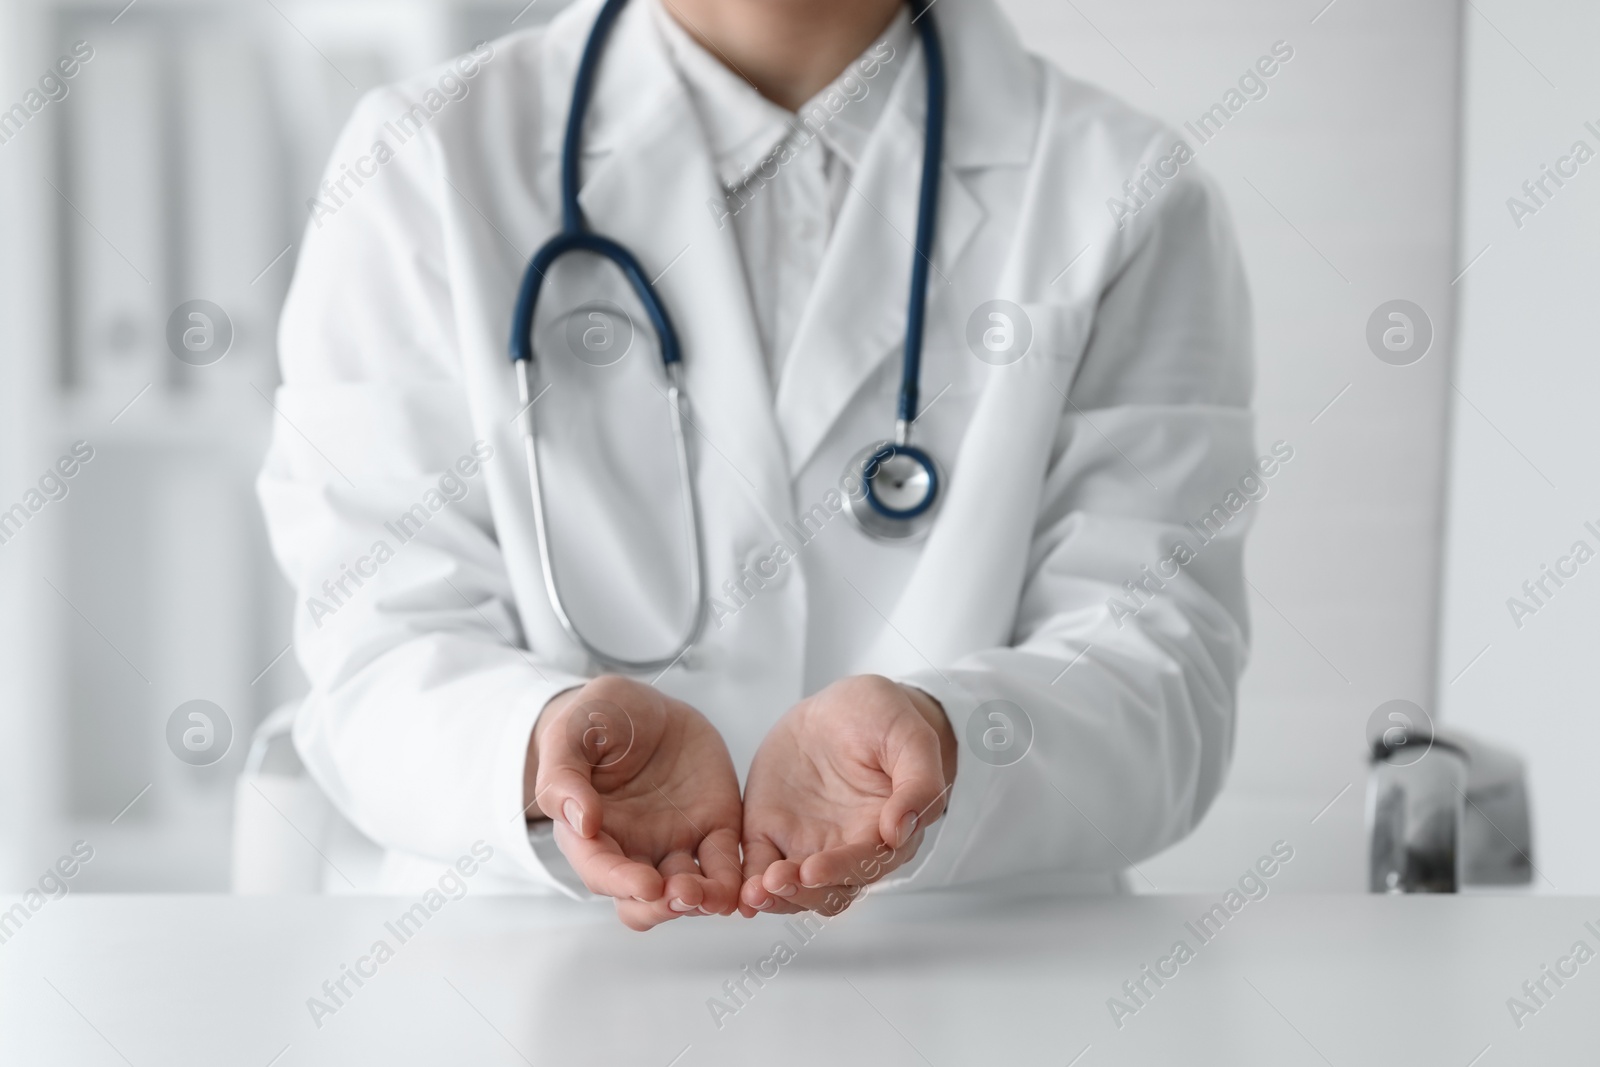 Photo of Doctor with stethoscope holding something at table in clinic, closeup